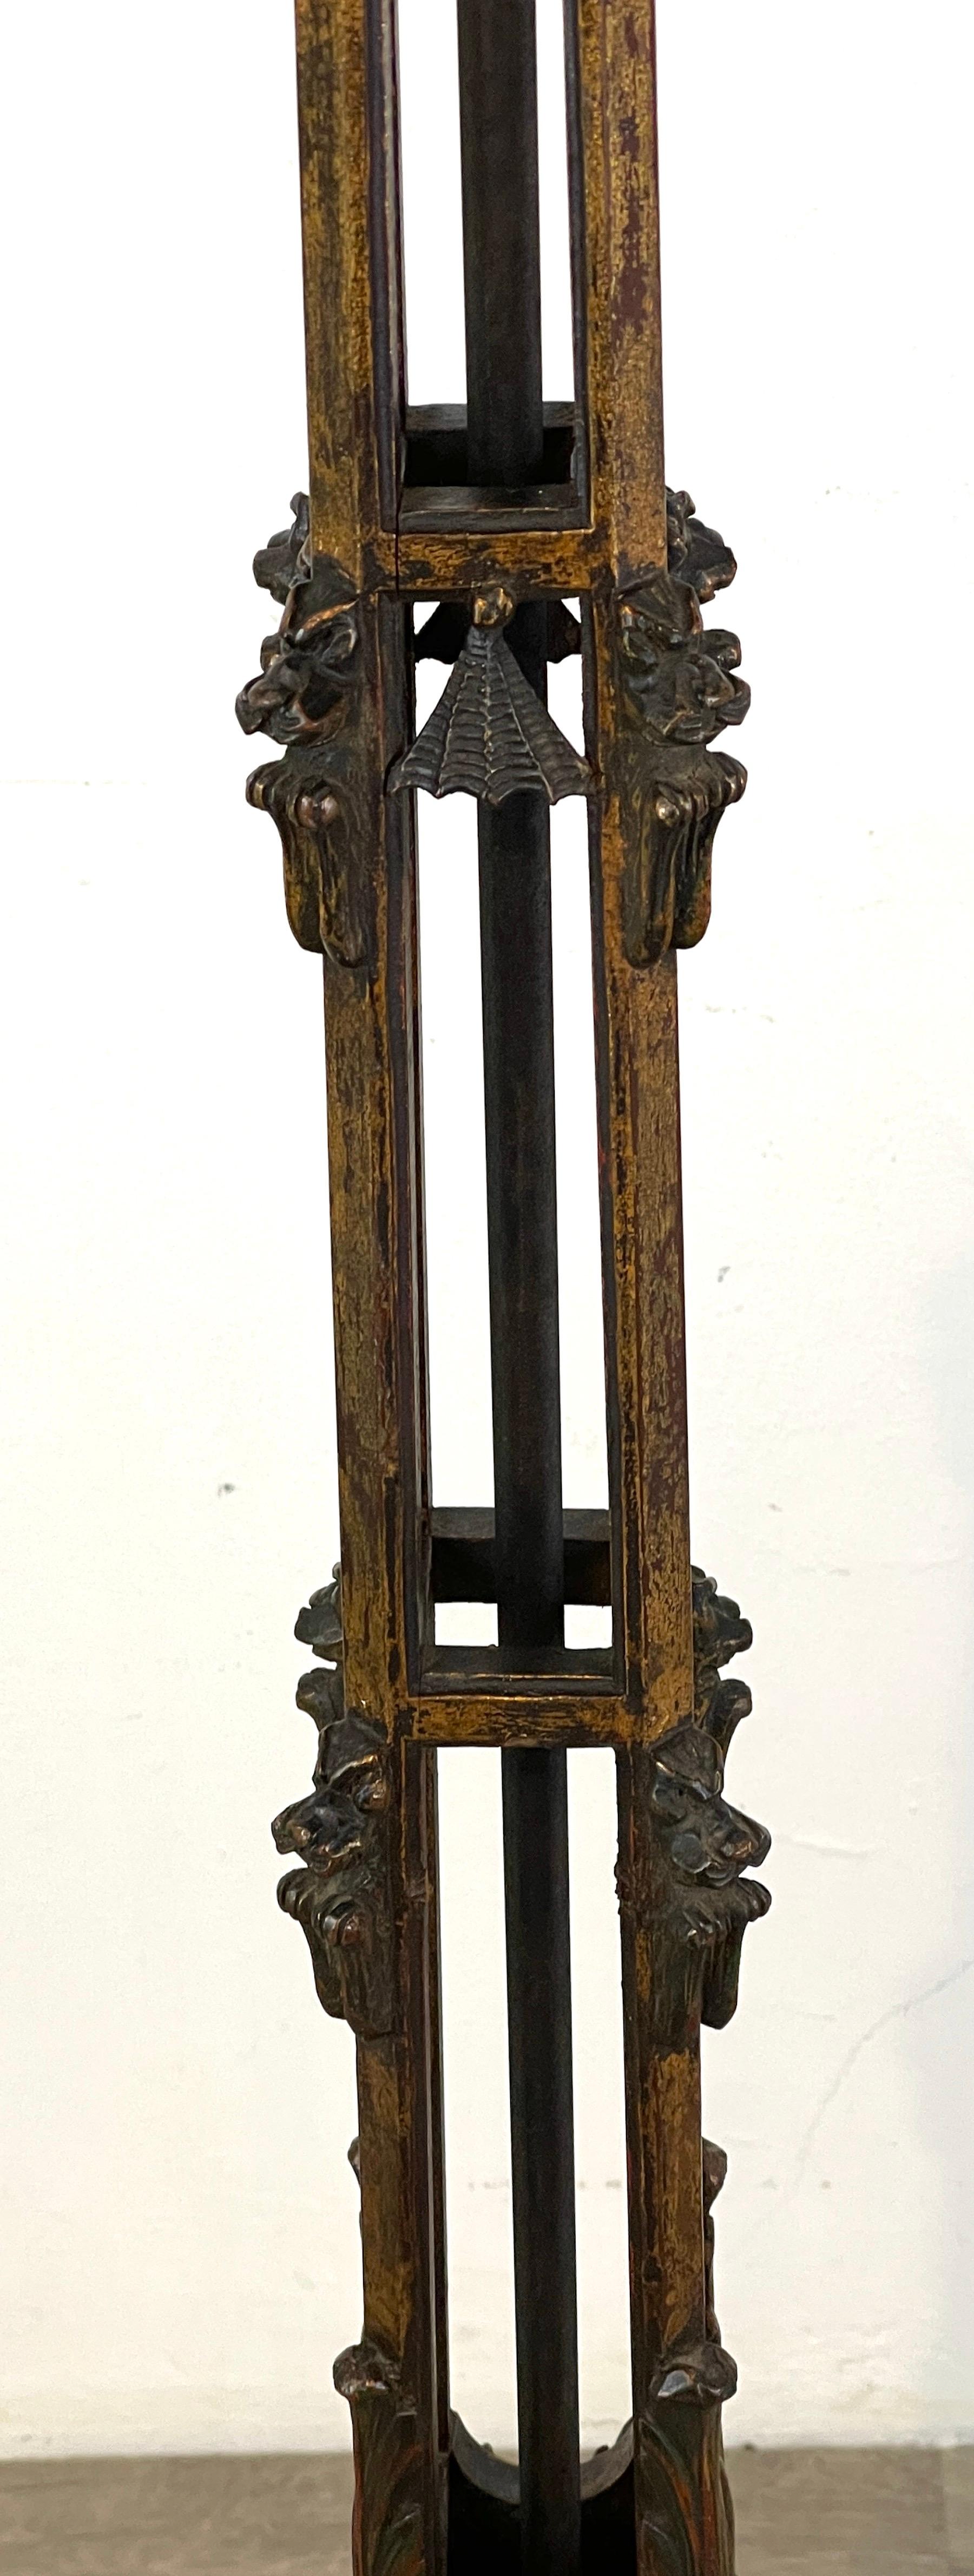 Carved & Polychromed Wood Chinoiserie Pagoda Motif Floor Lamp, England, C 1900s For Sale 1